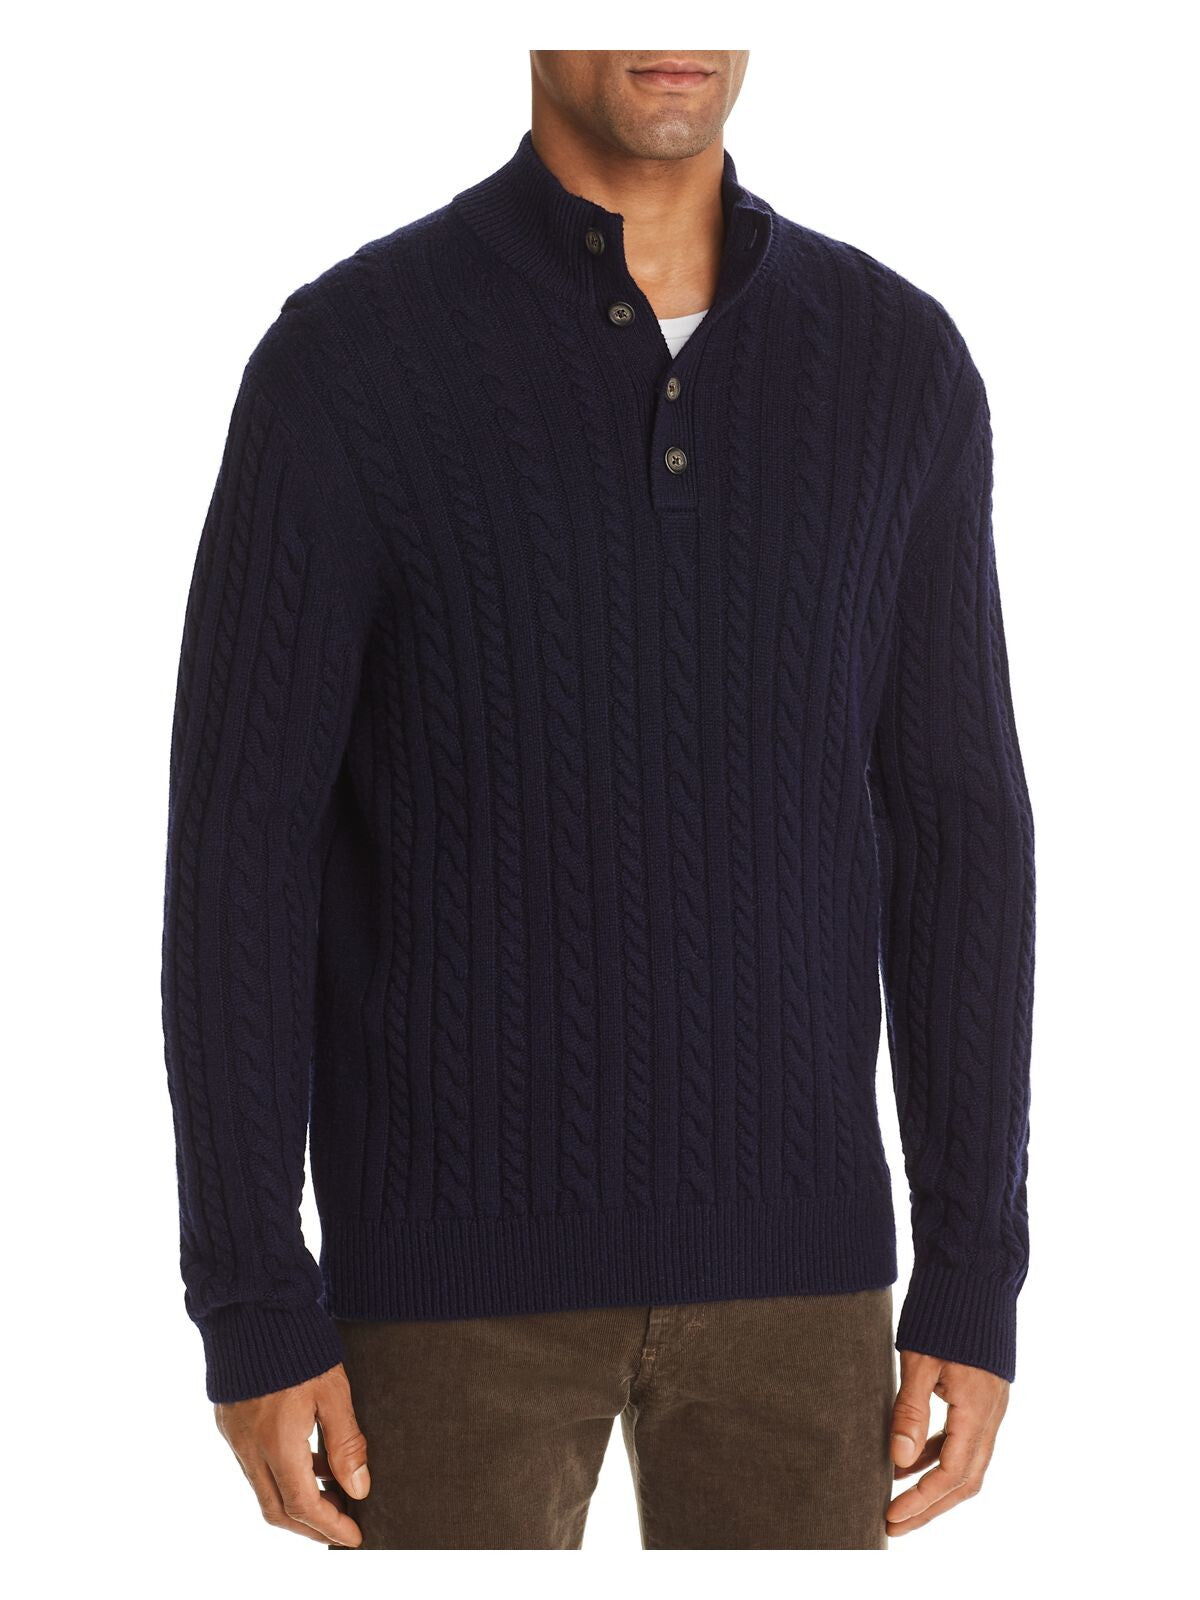 THE MENS STORE Mens Blue Classic Fit Sweater S